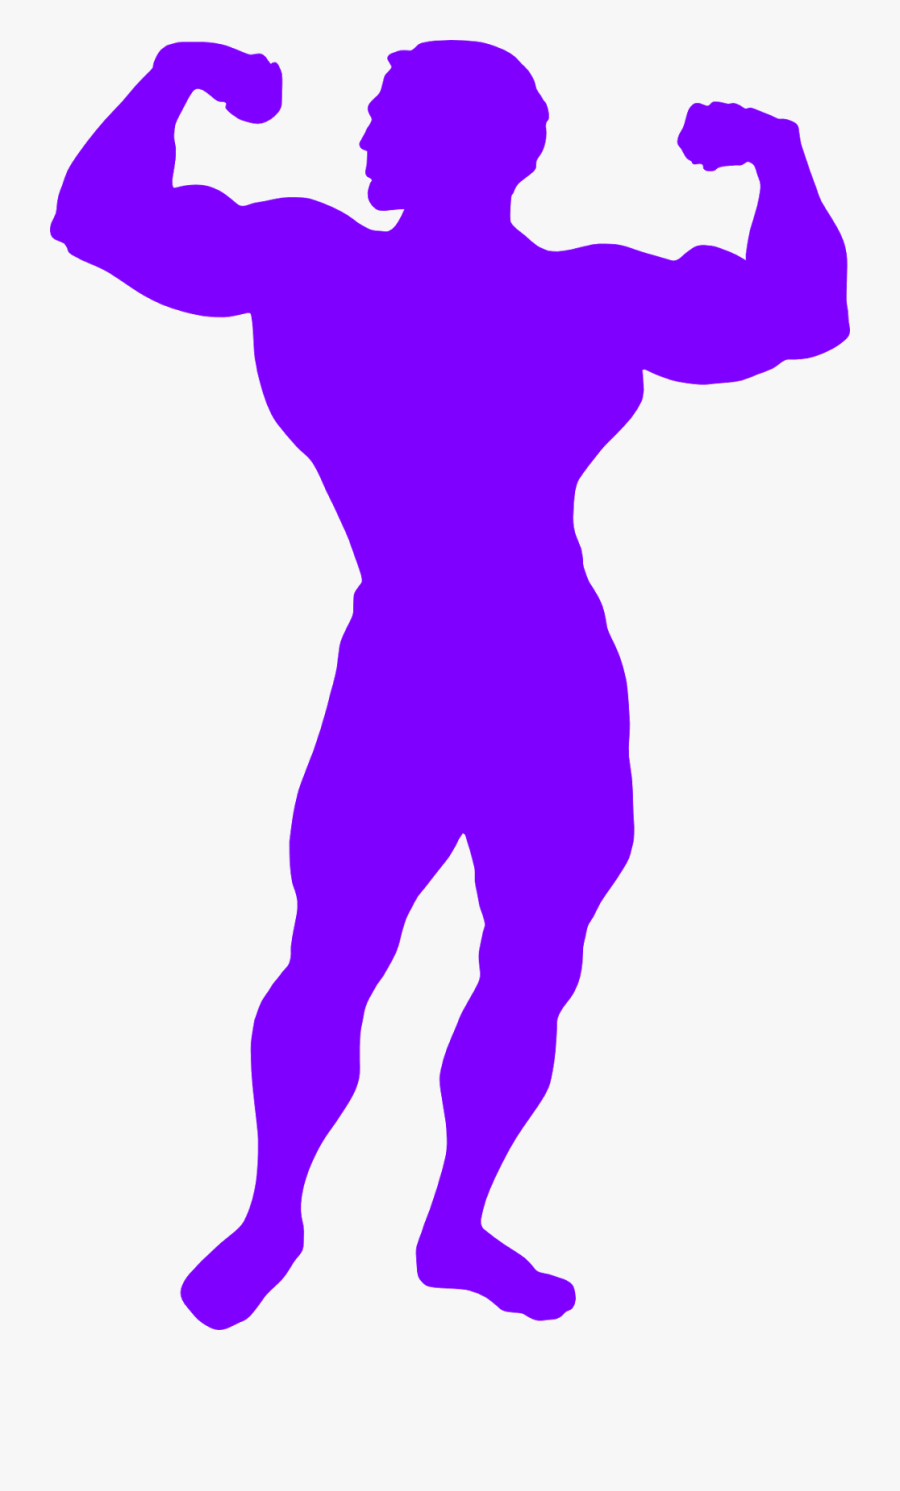 Buff 170 Pounds, Weight Loss Pictures, Weight Loss - Muscular Man Silhouette Png, Transparent Clipart